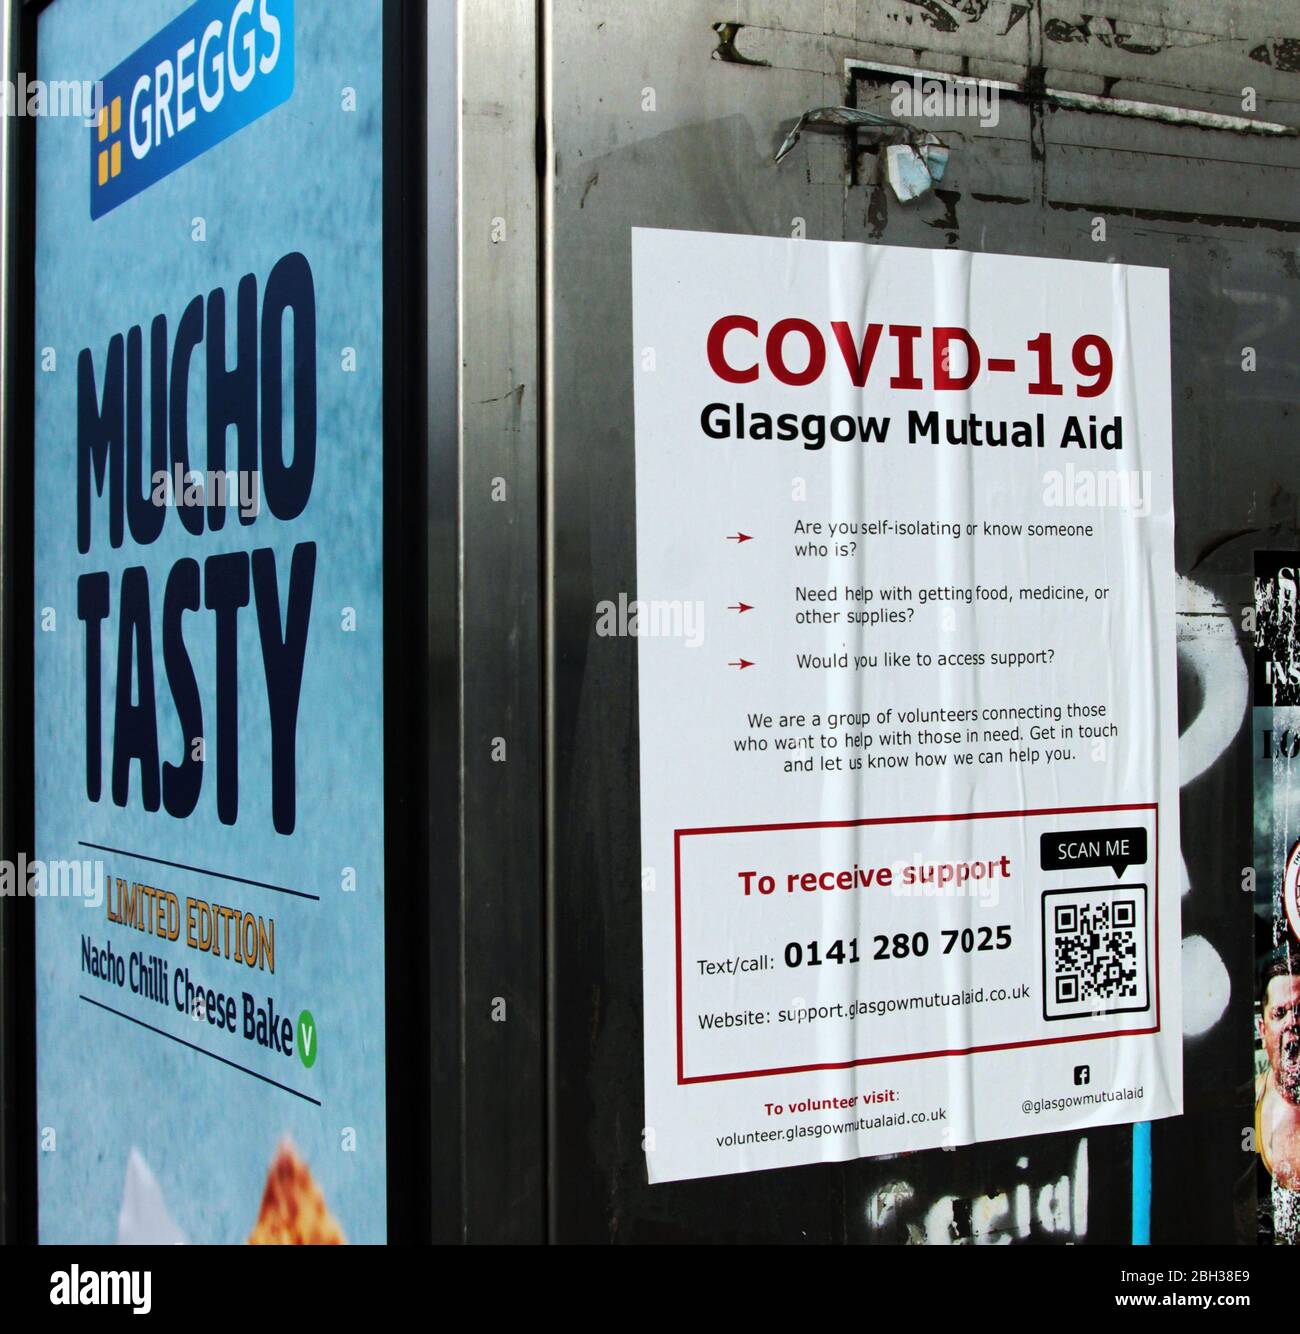 A Greggs bakery sign next to a help and advice poster giving information on where to get help during this Covid-19 and coronavirus pandemic that is raging though Britain. The whole country is in lockdown. Glasgow. April 2020. ALAN WYLIE/ALAMY© Stock Photo